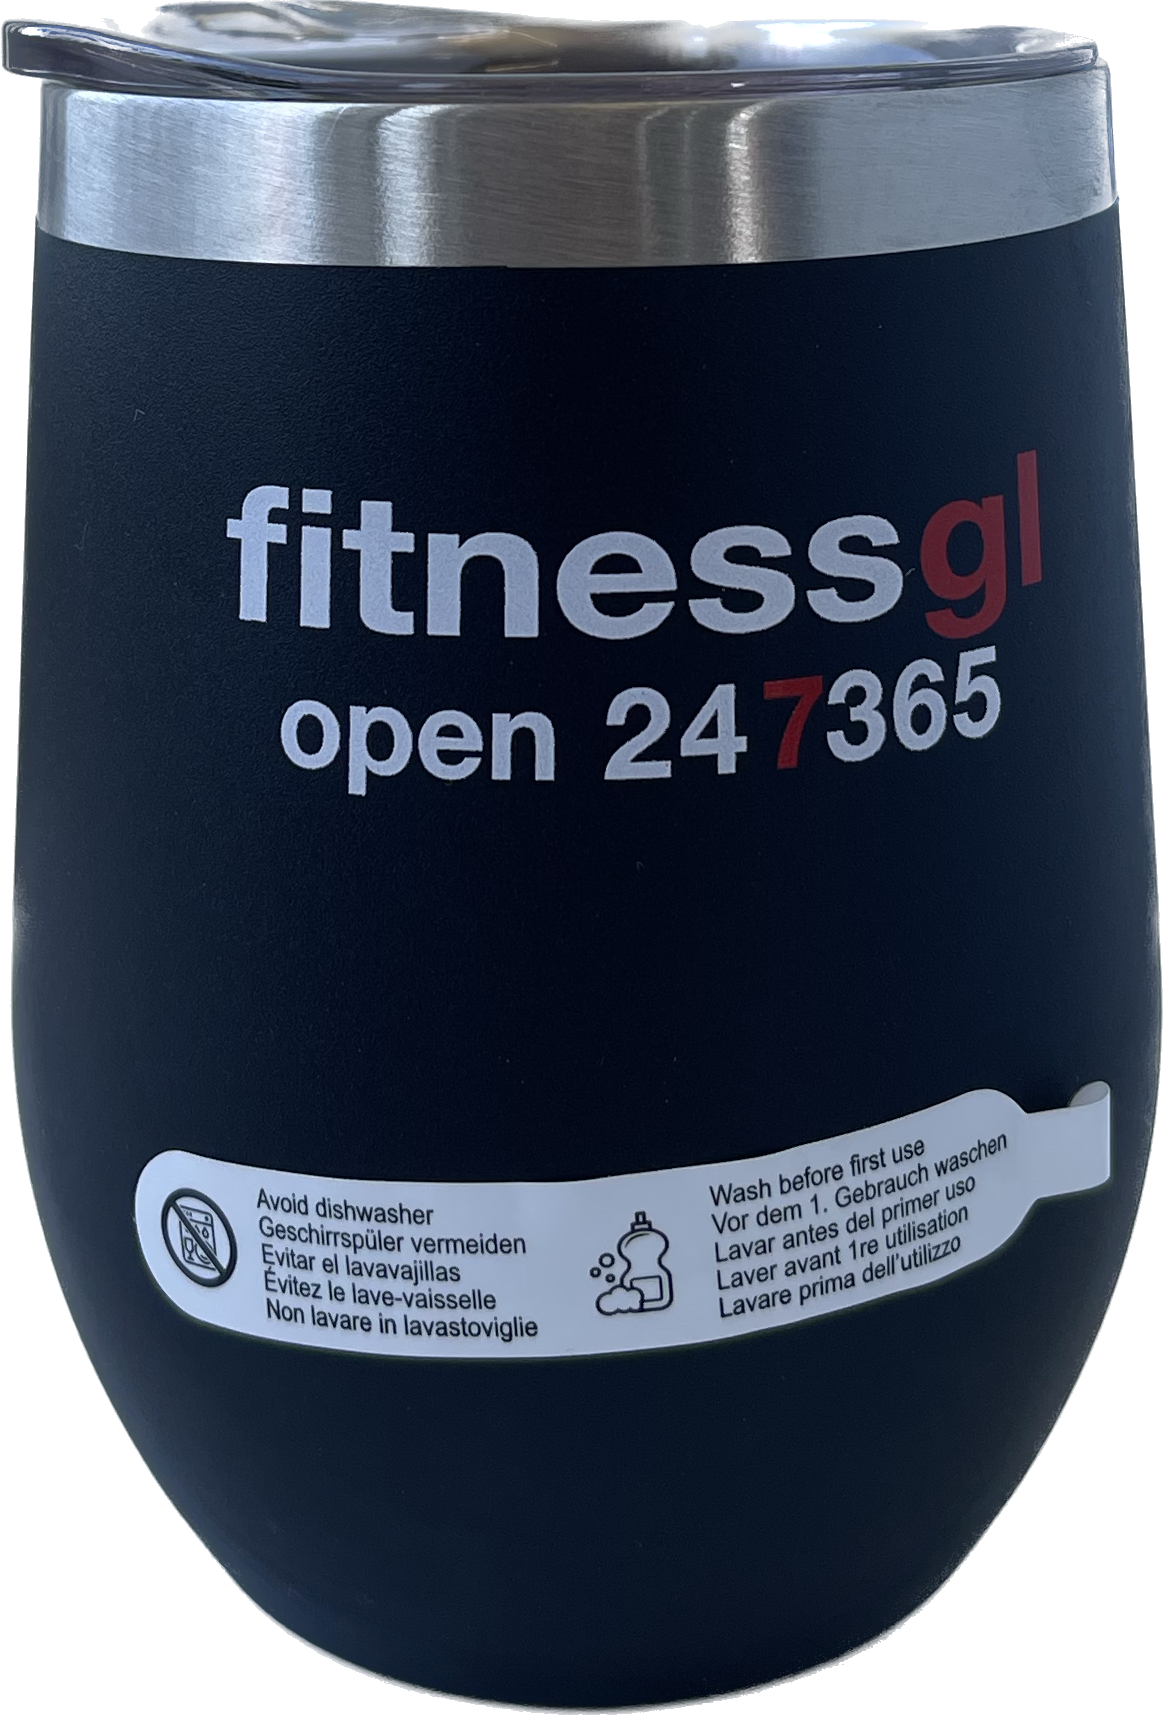 fitnessgl Thermo coffee cup